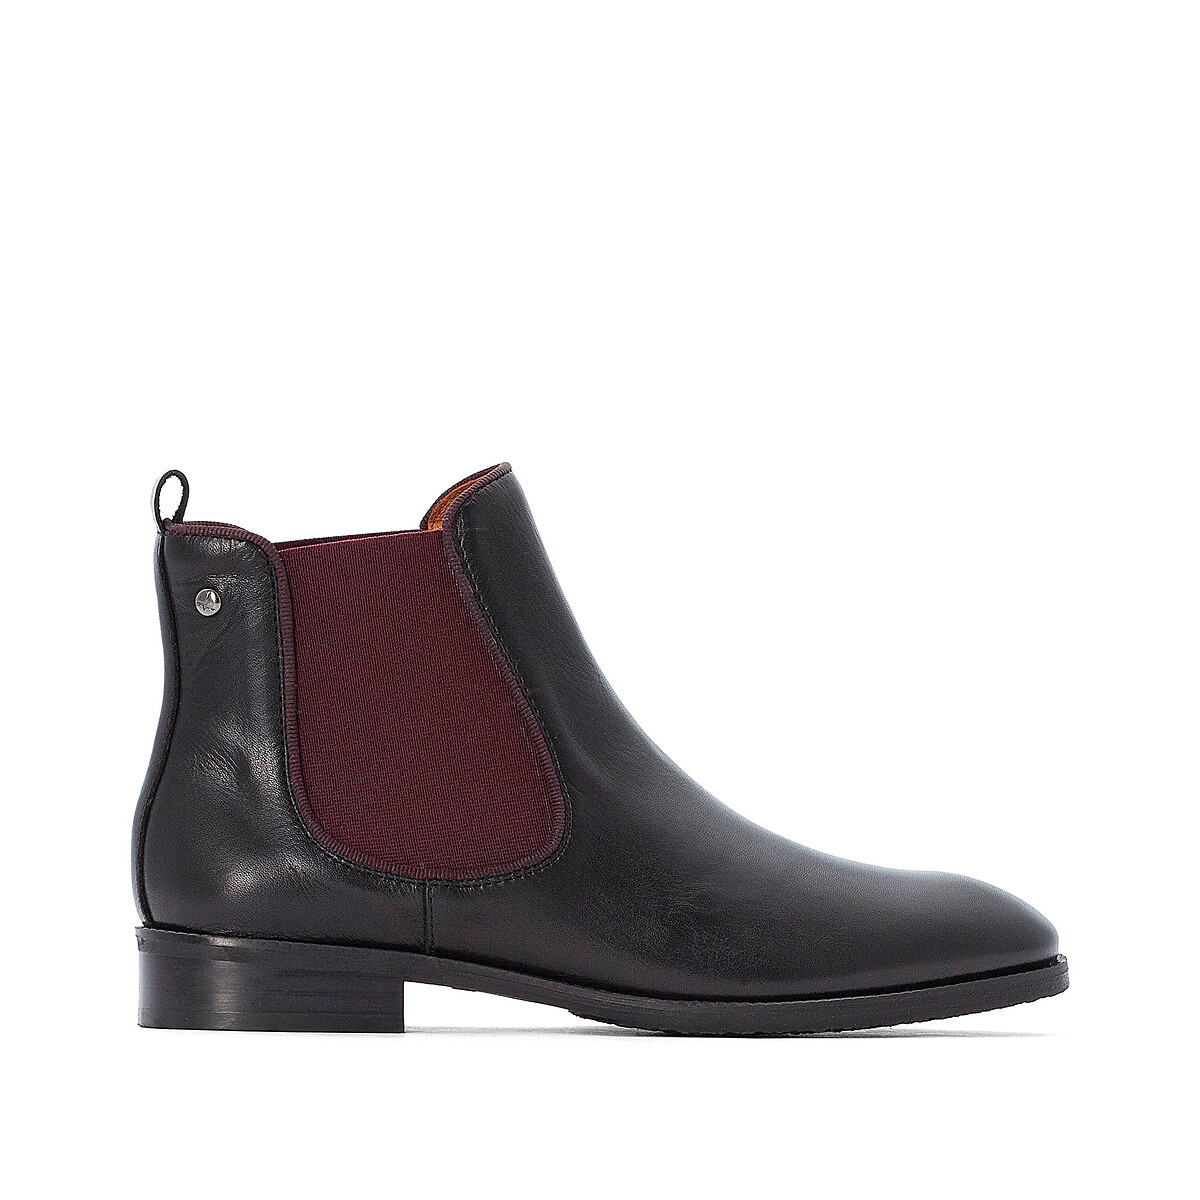 Royal Leather Chelsea Ankle Boots